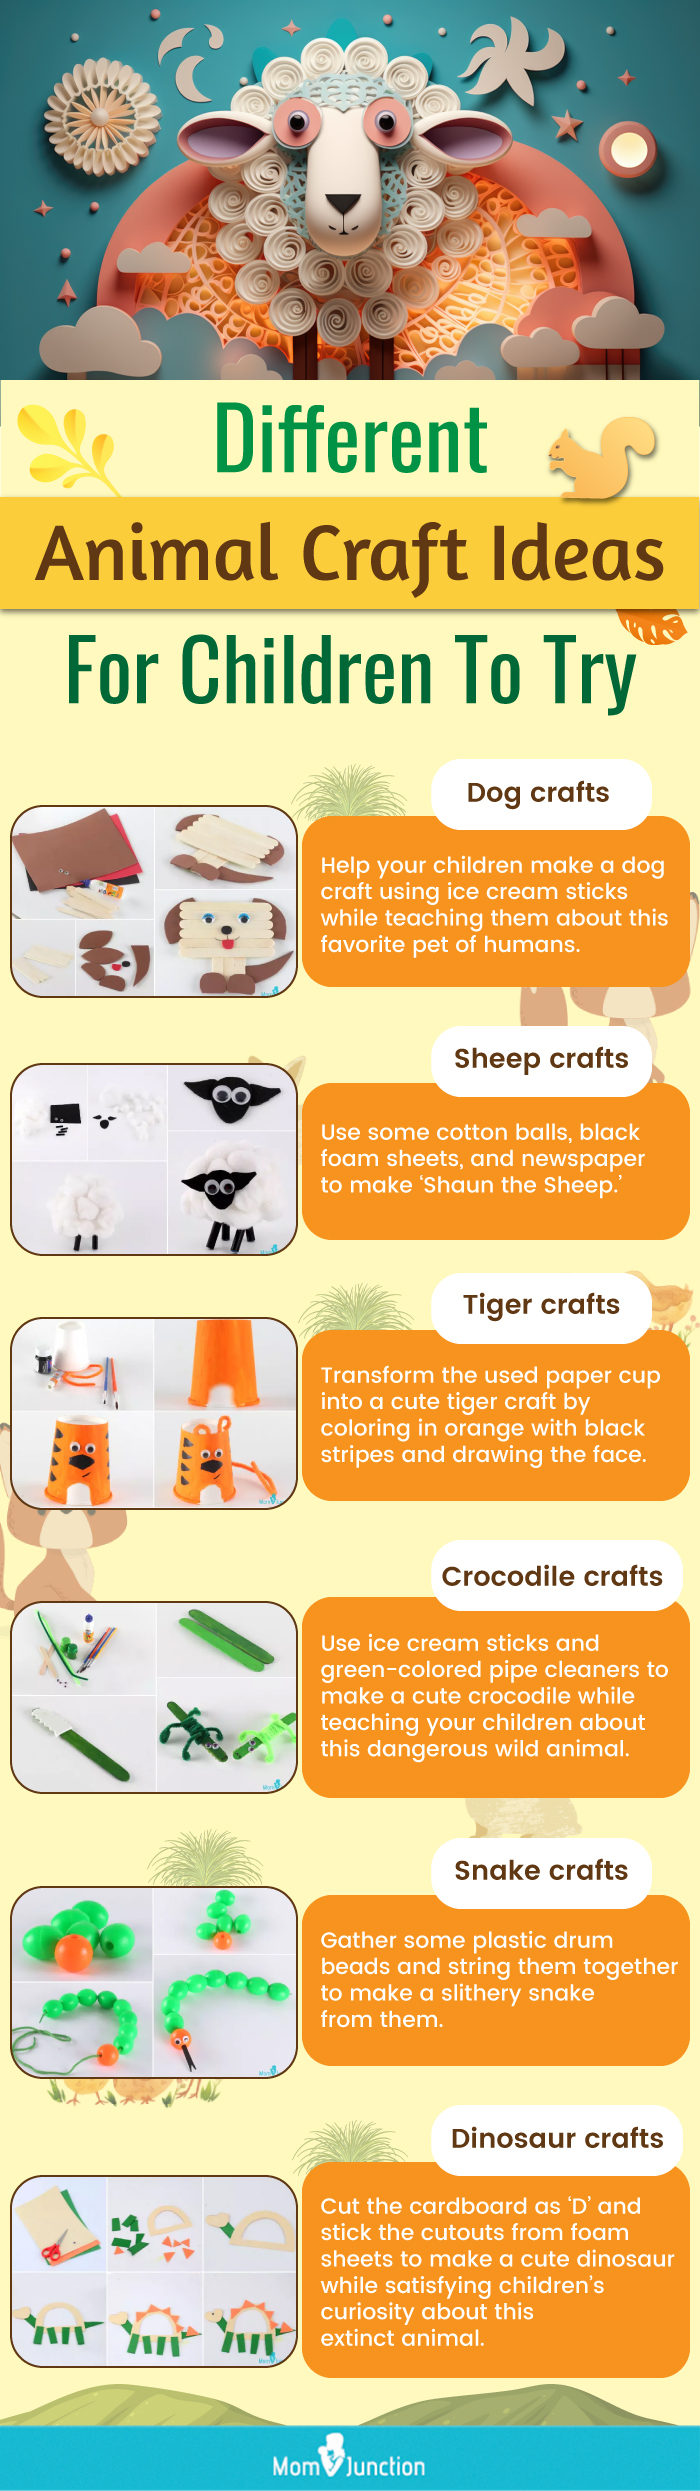 different animal craft ideas for children to try (infographic)